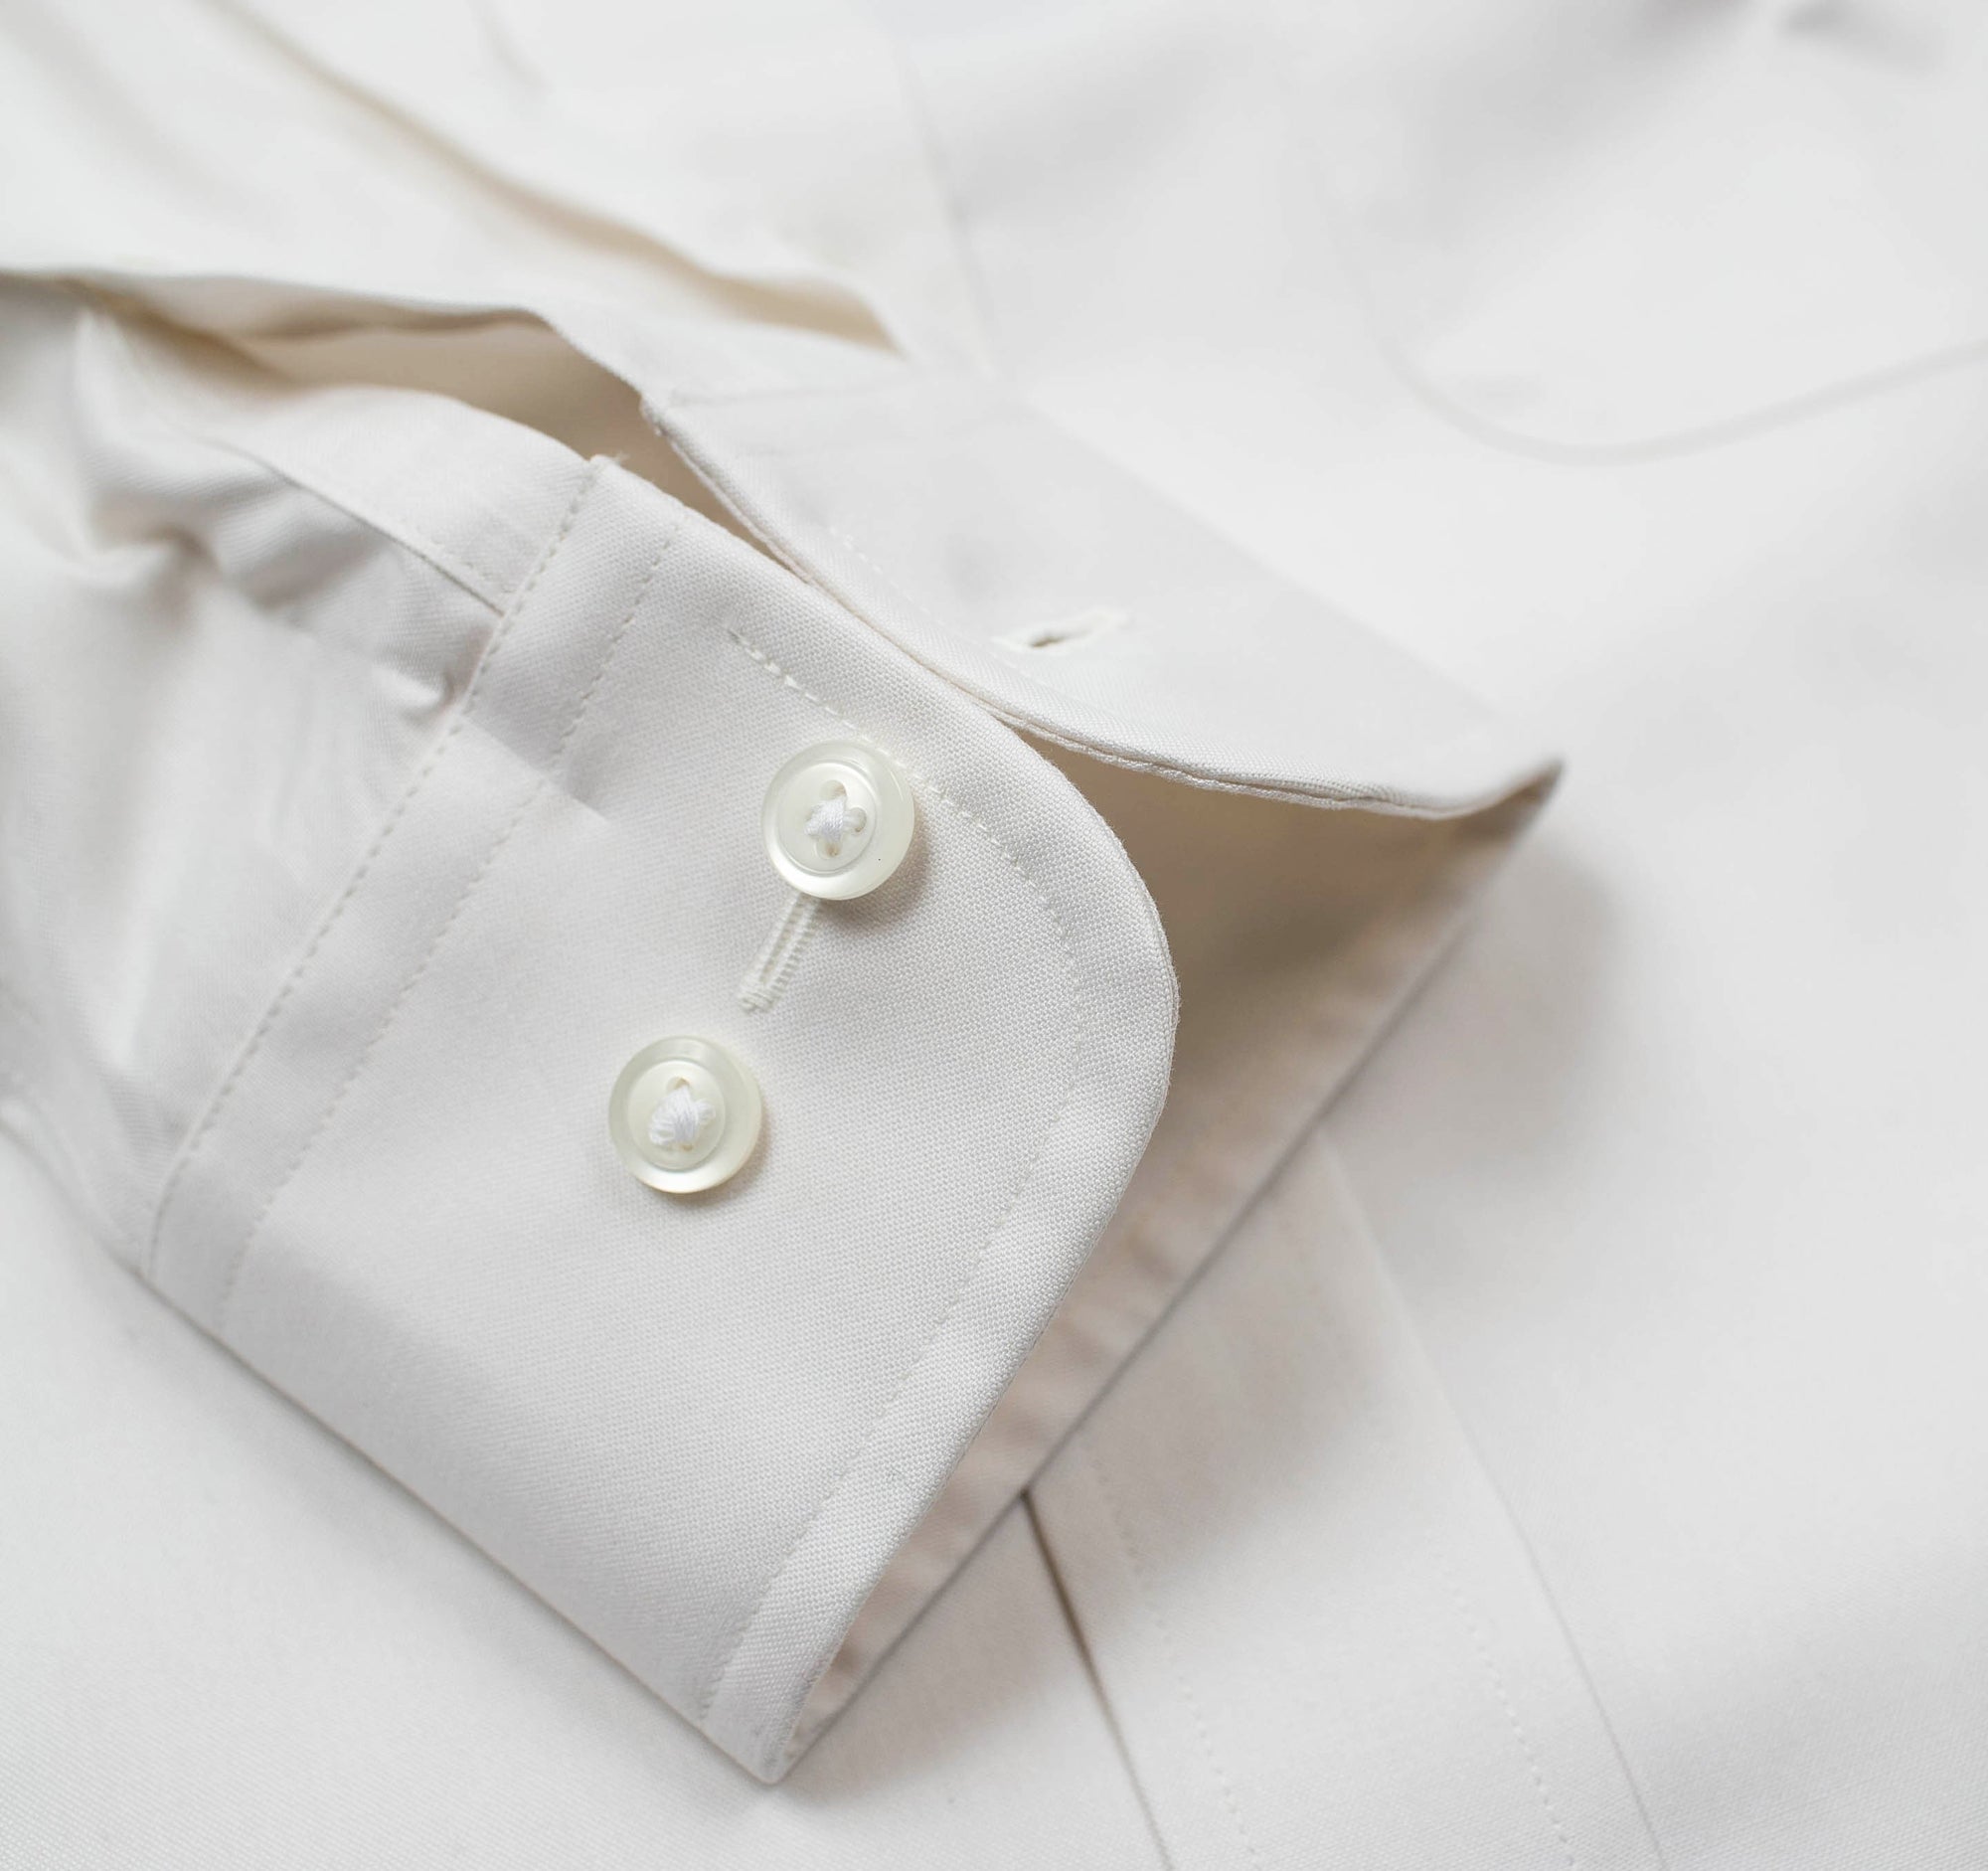 The Classic Sandstone - Wrinkle-Free Pinpoint Oxford Cotton Dress Shirt by Cooper & Stewart